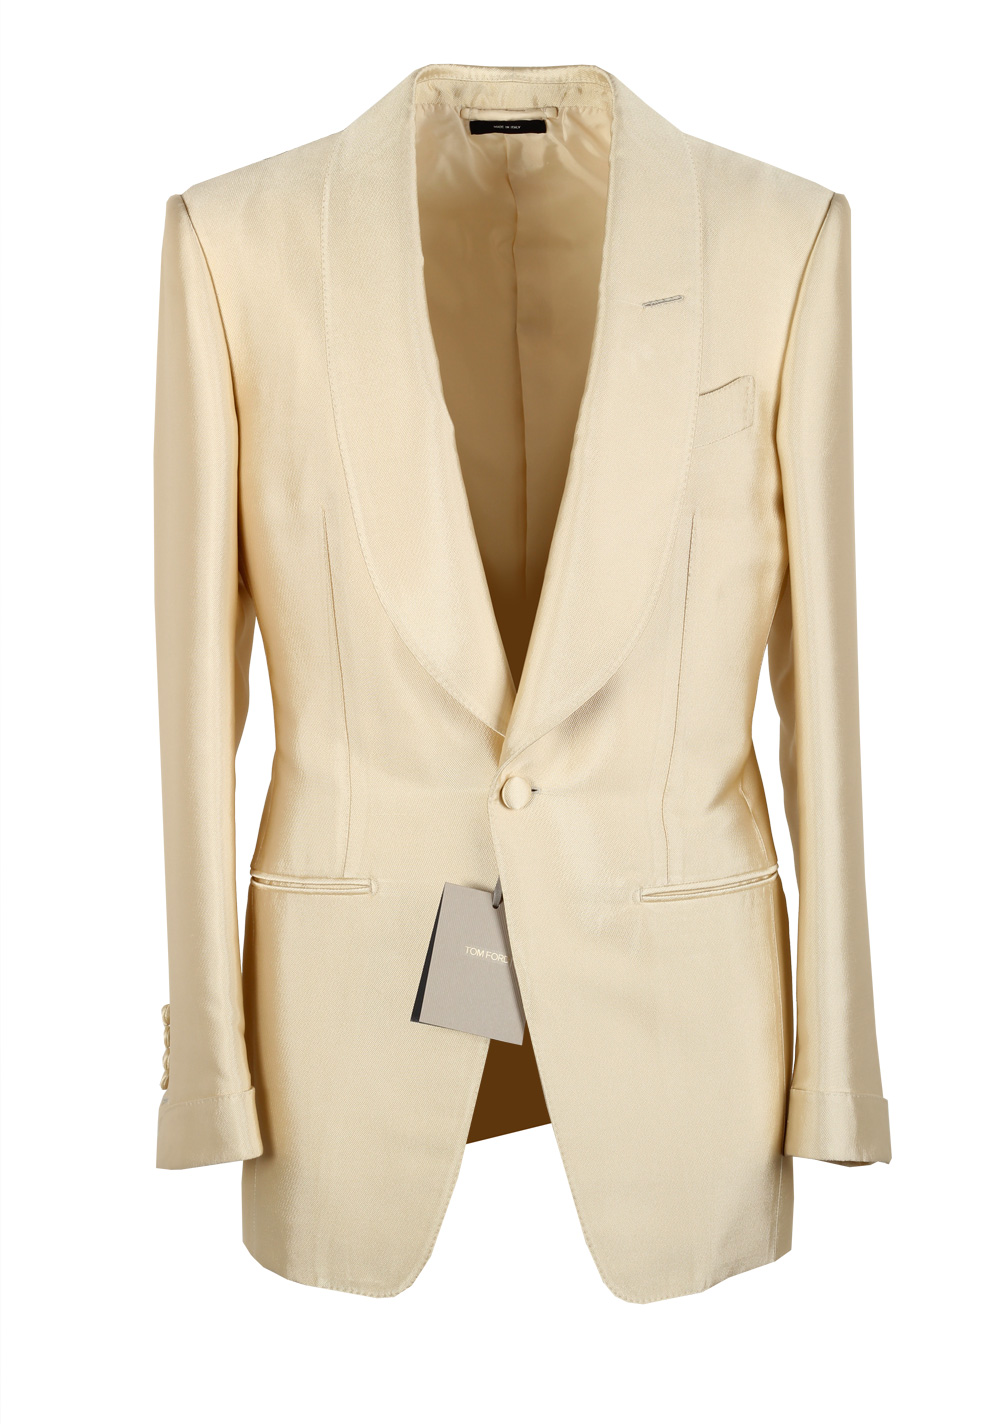 TOM FORD Atticus Off White Tuxedo Dinner Jacket Size 46 / 36R . |  Costume Limité